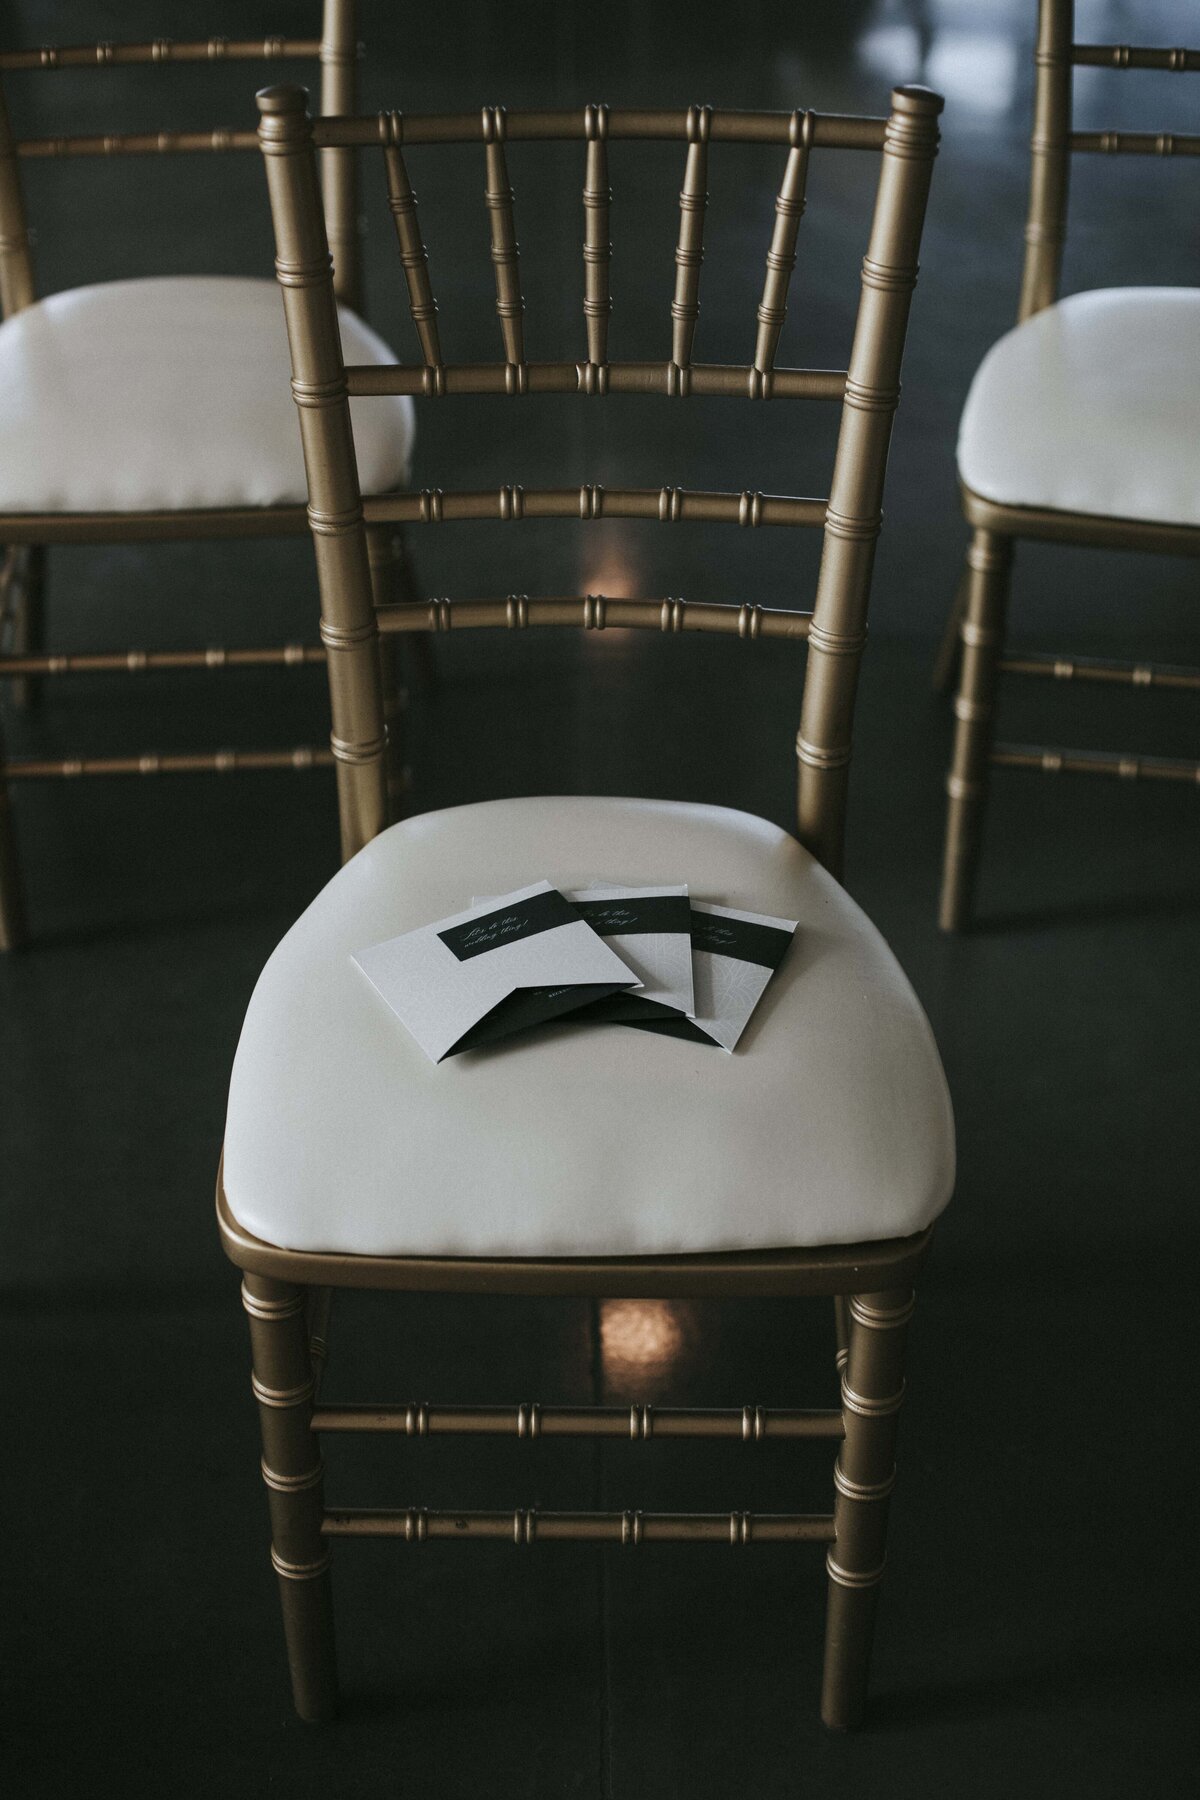 White squared wedding invitations with dark green labels on a gold chair with ivory seat.